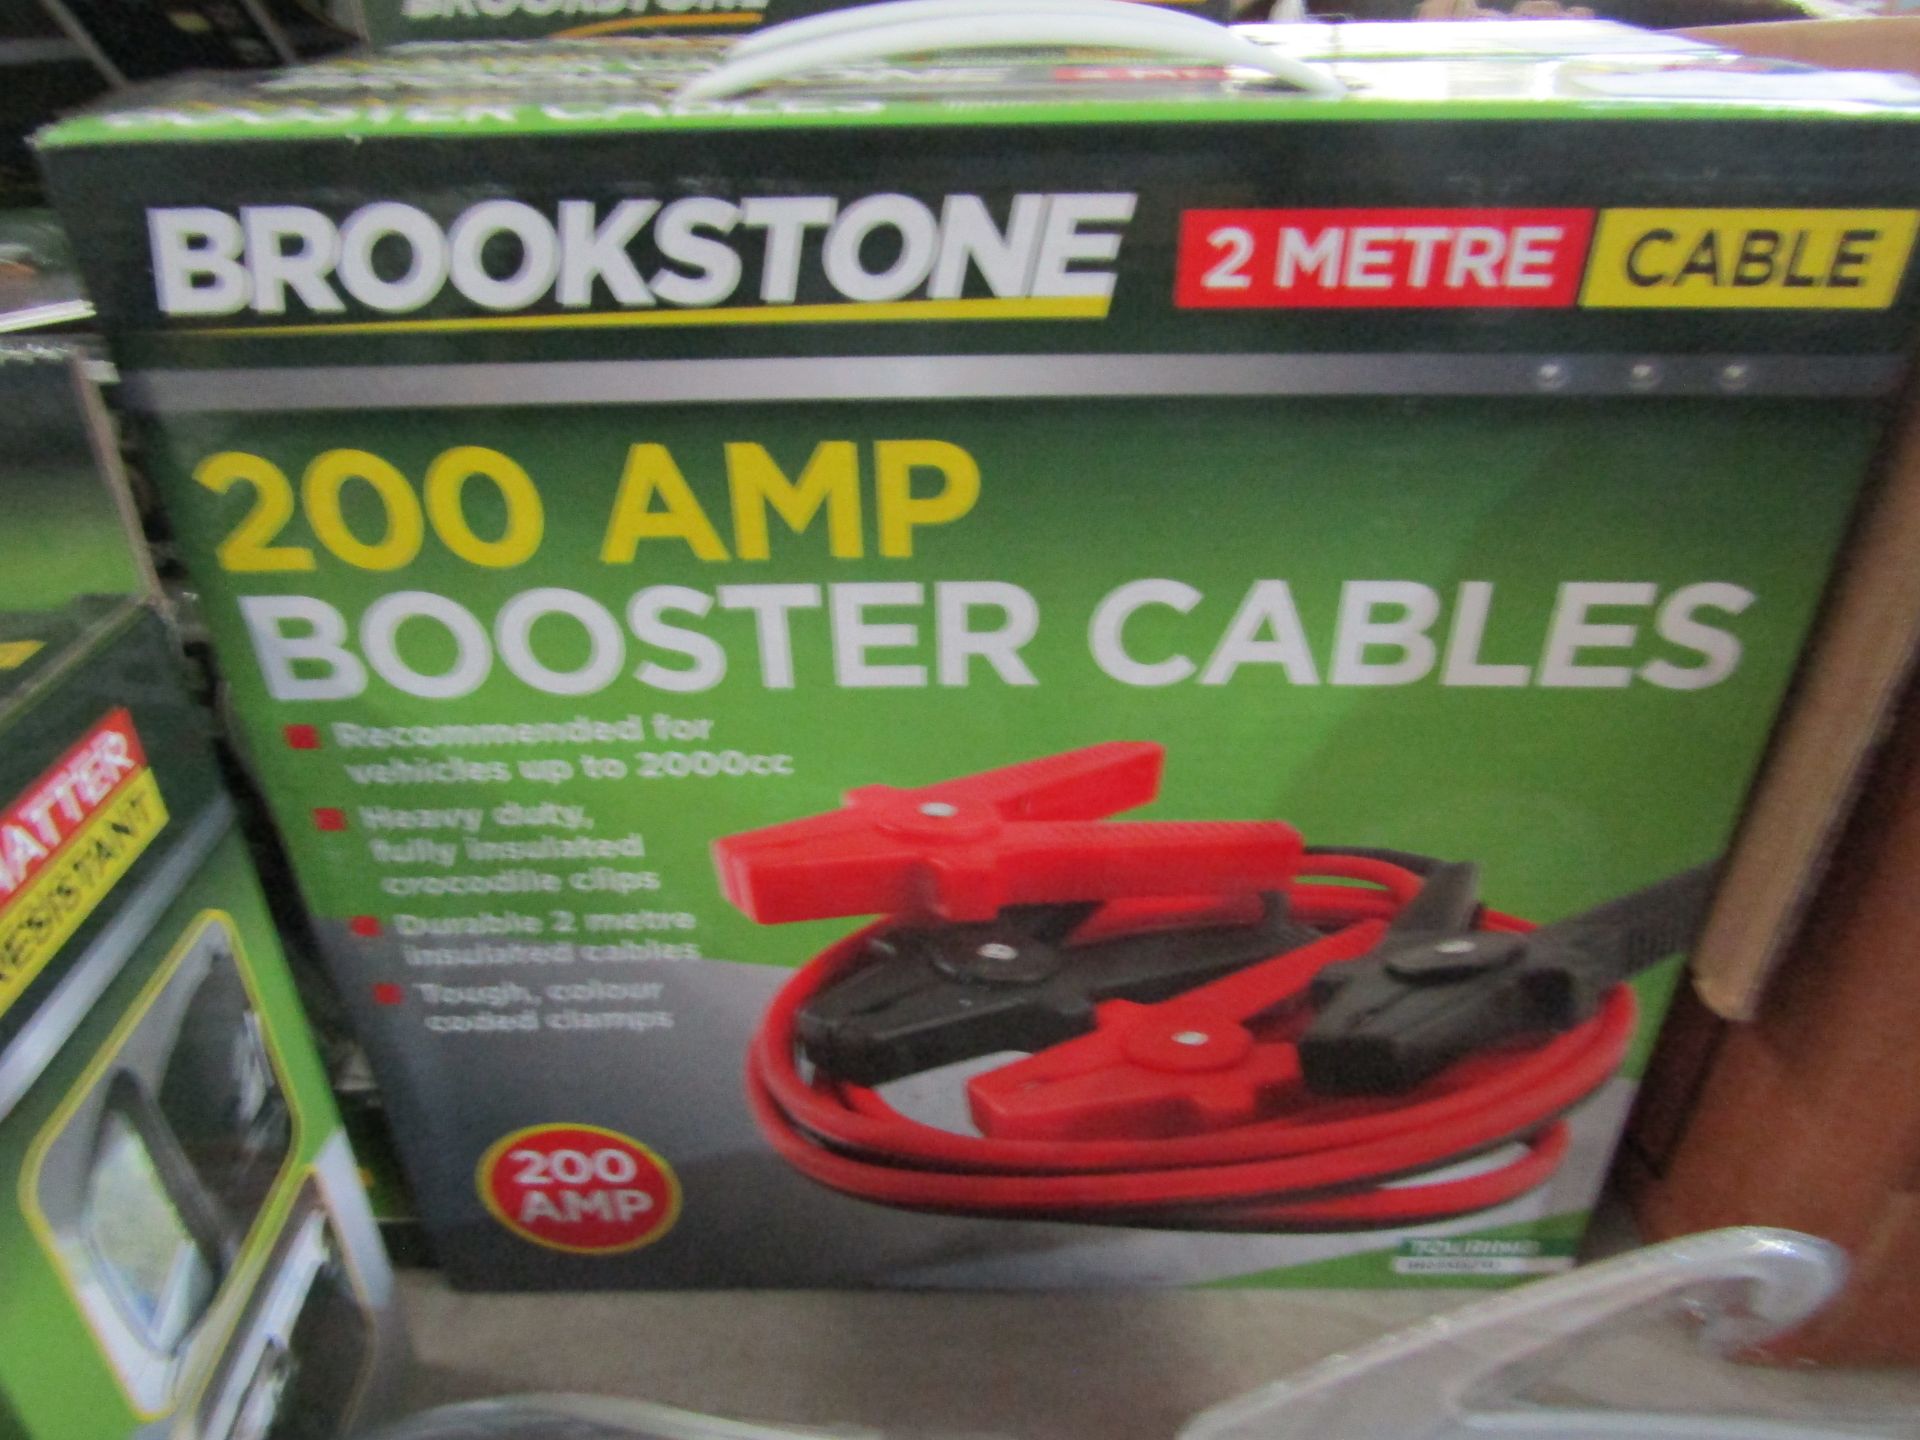 Brookstone - 200Amp Booster Cables 2m - New & Boxed.